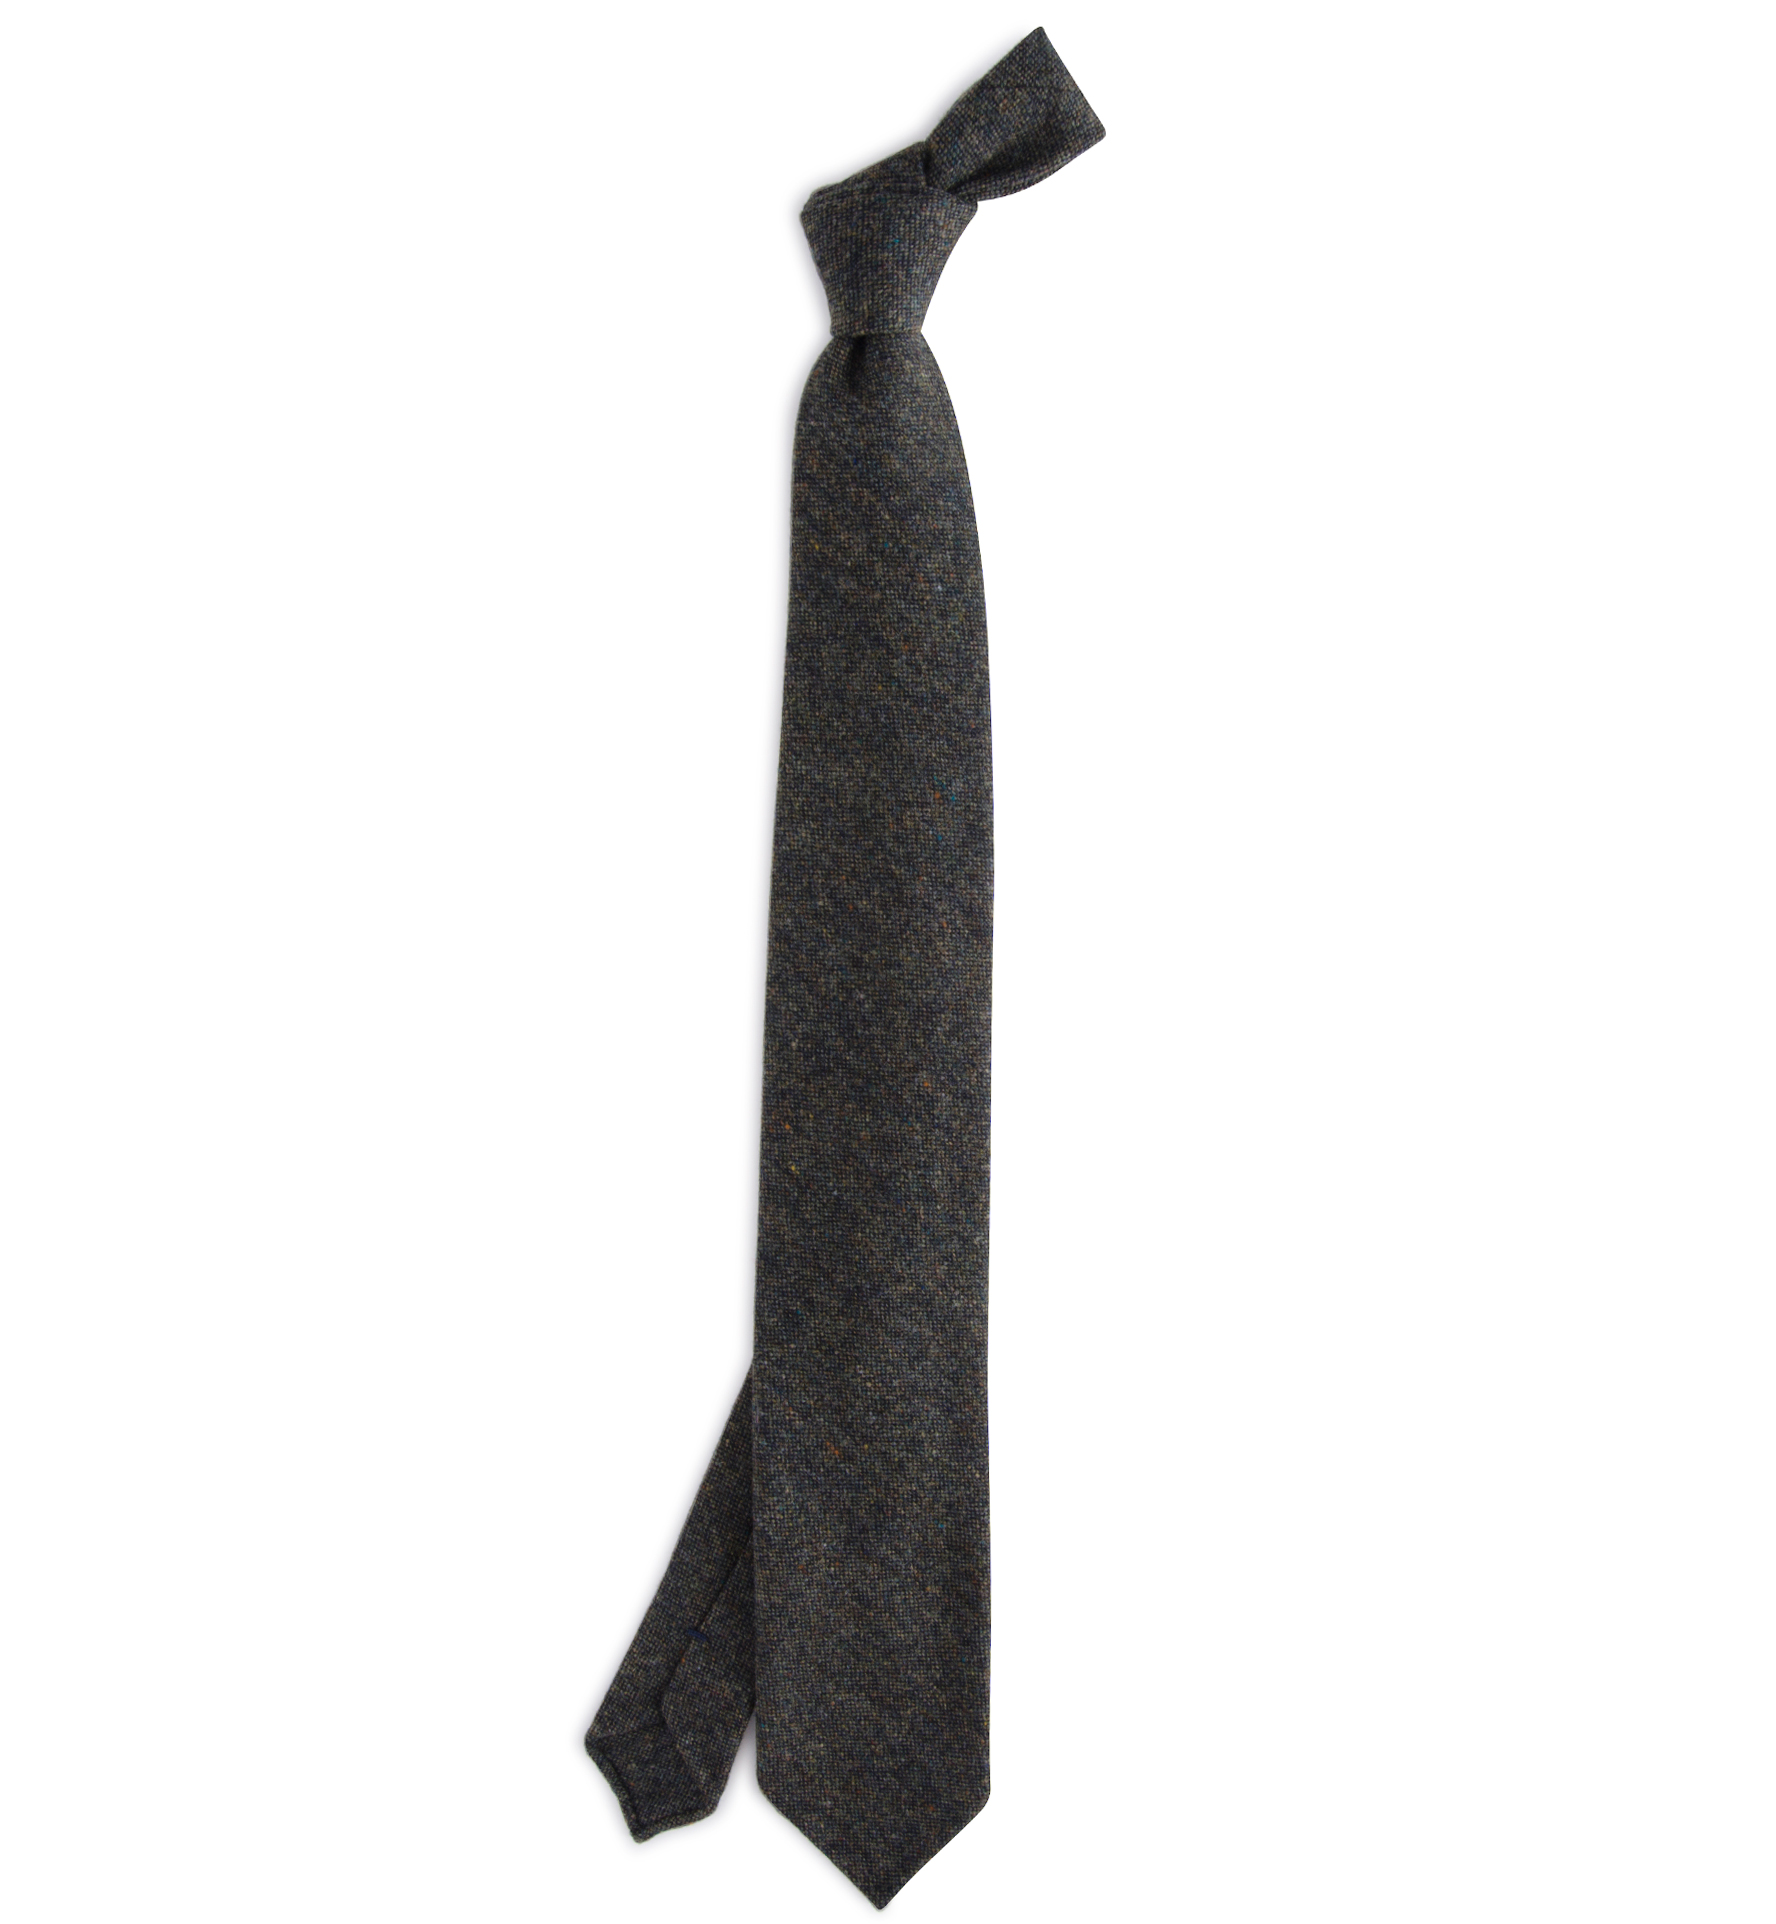 Piedmont Pine Donegal Wool Tie by Proper Cloth